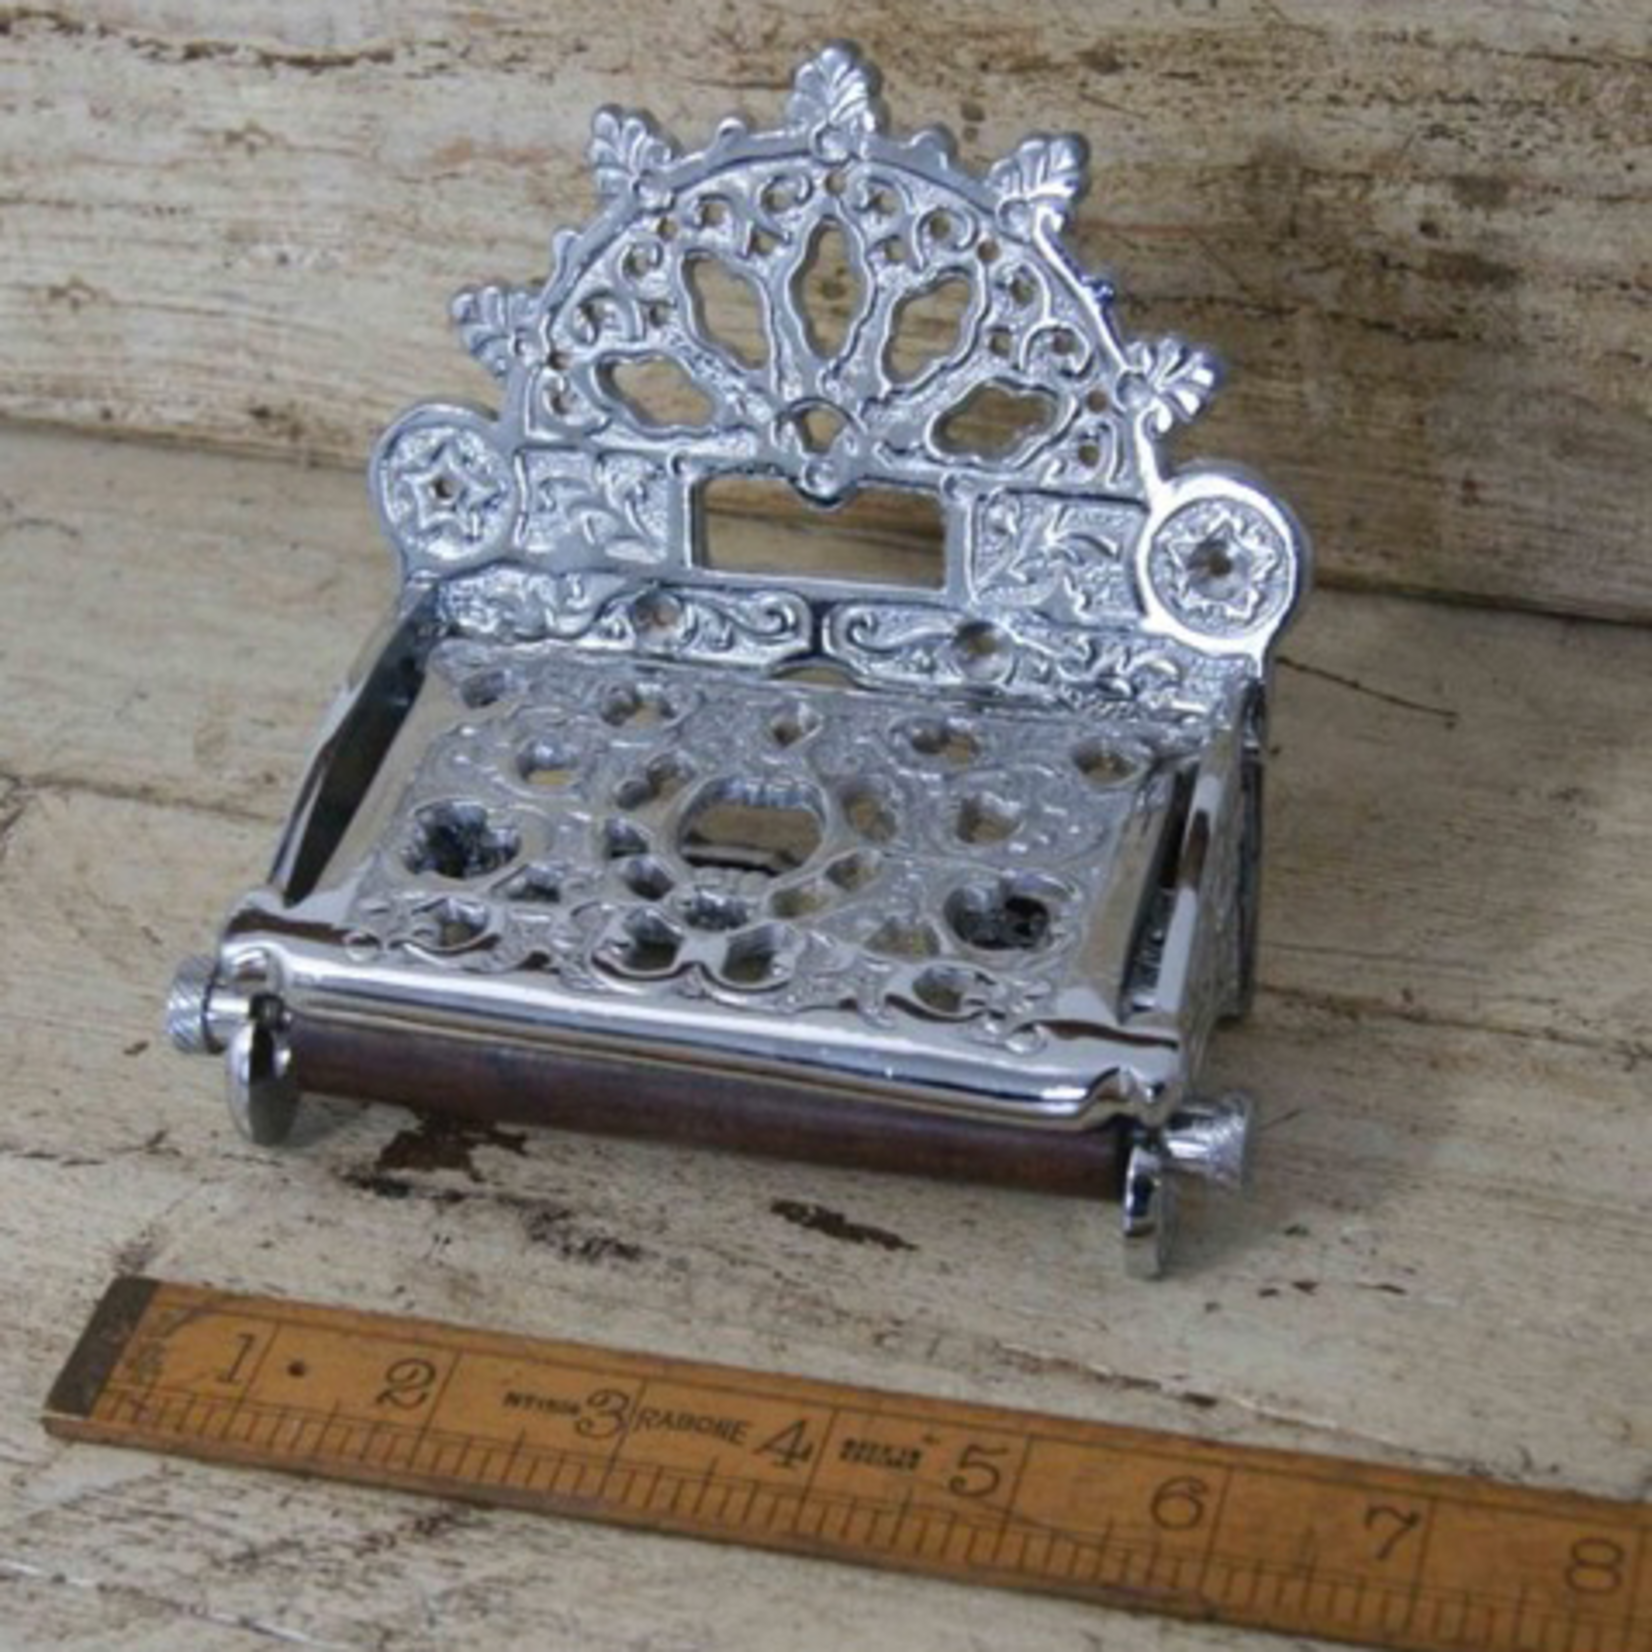 IRON RANGE Victorian Toilet Roll Holder Plated Chrome on brass with Lid This Fixture is Super Shiny!